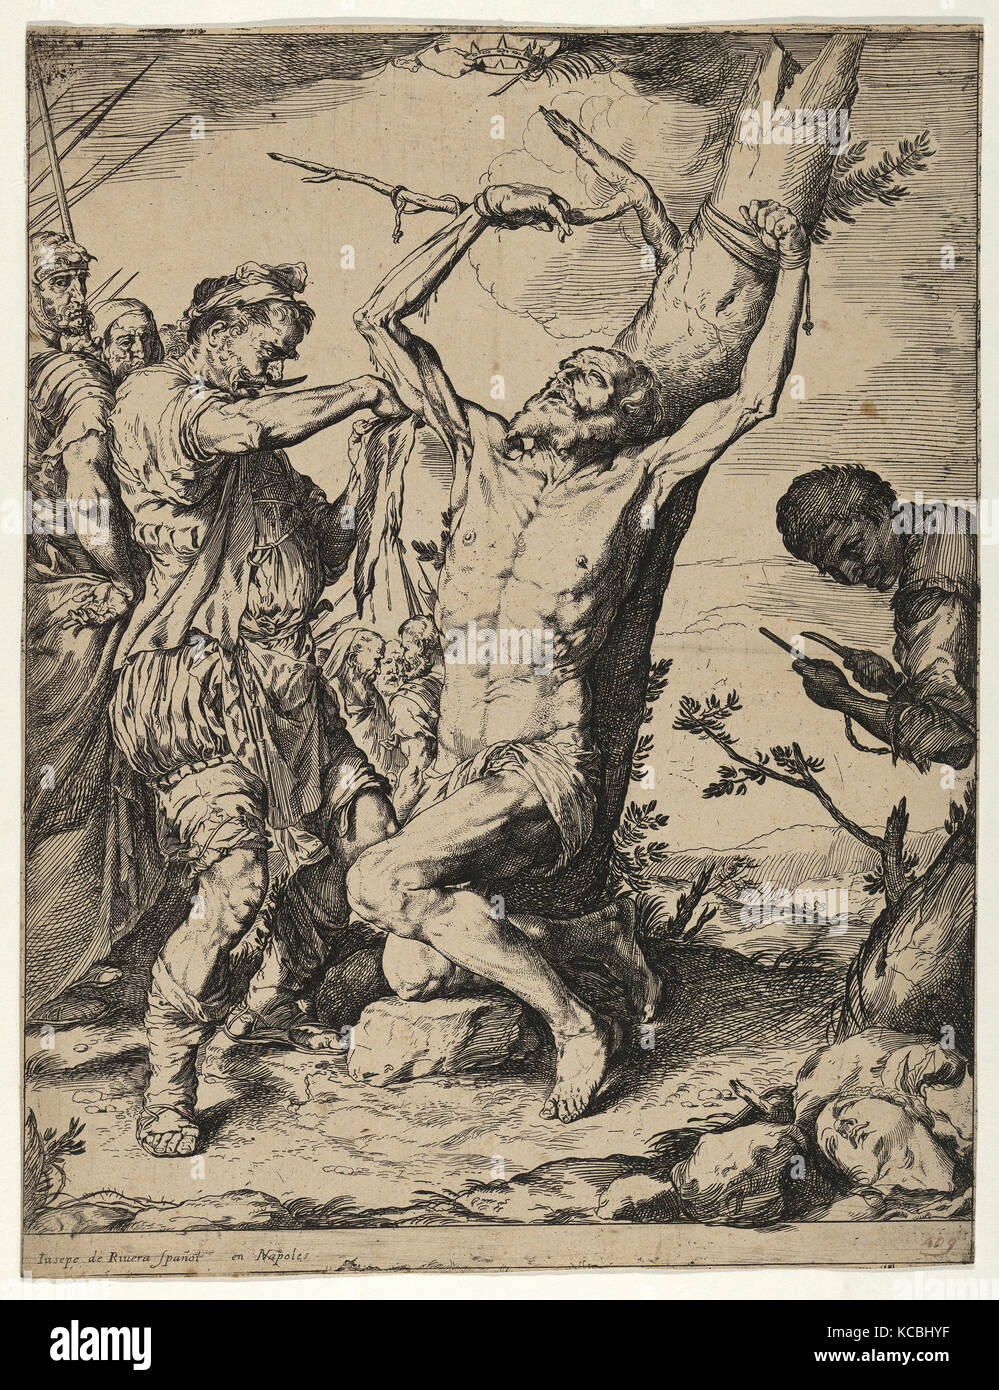 Drawings and Prints, Print, The Martyrdom of Saint Bartholomew, Artist, After, Jusepe de Ribera (called Lo Spagnoletto), Spanish Stock Photo